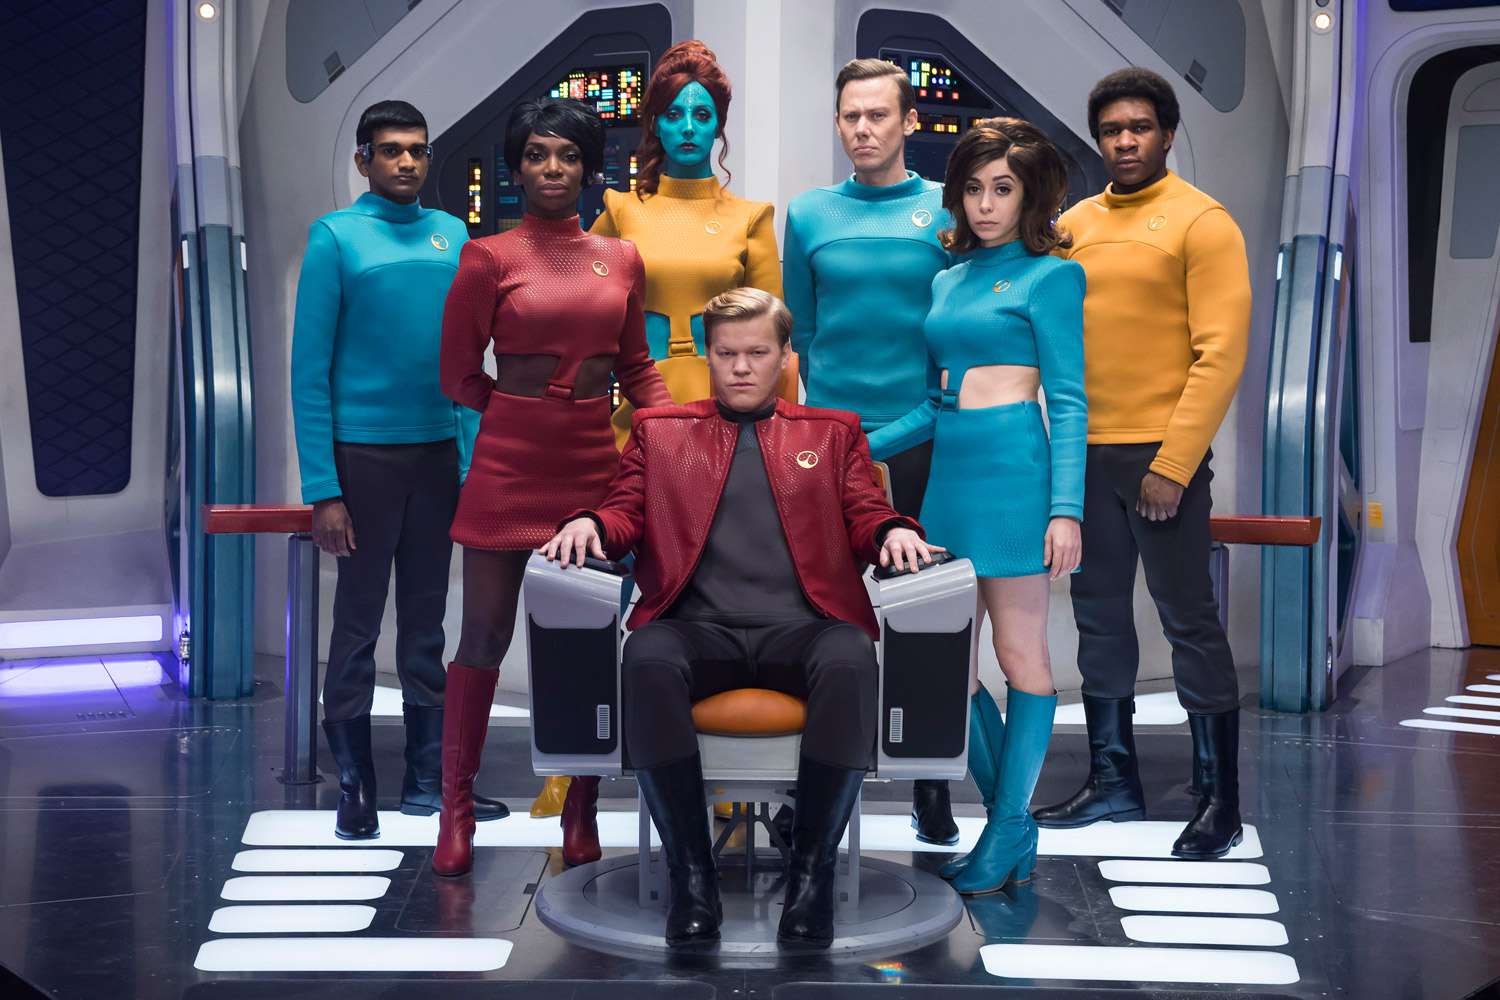 What to Expect from 'Black Mirror' Season 7? Release Date, Cast, and Plot Details!